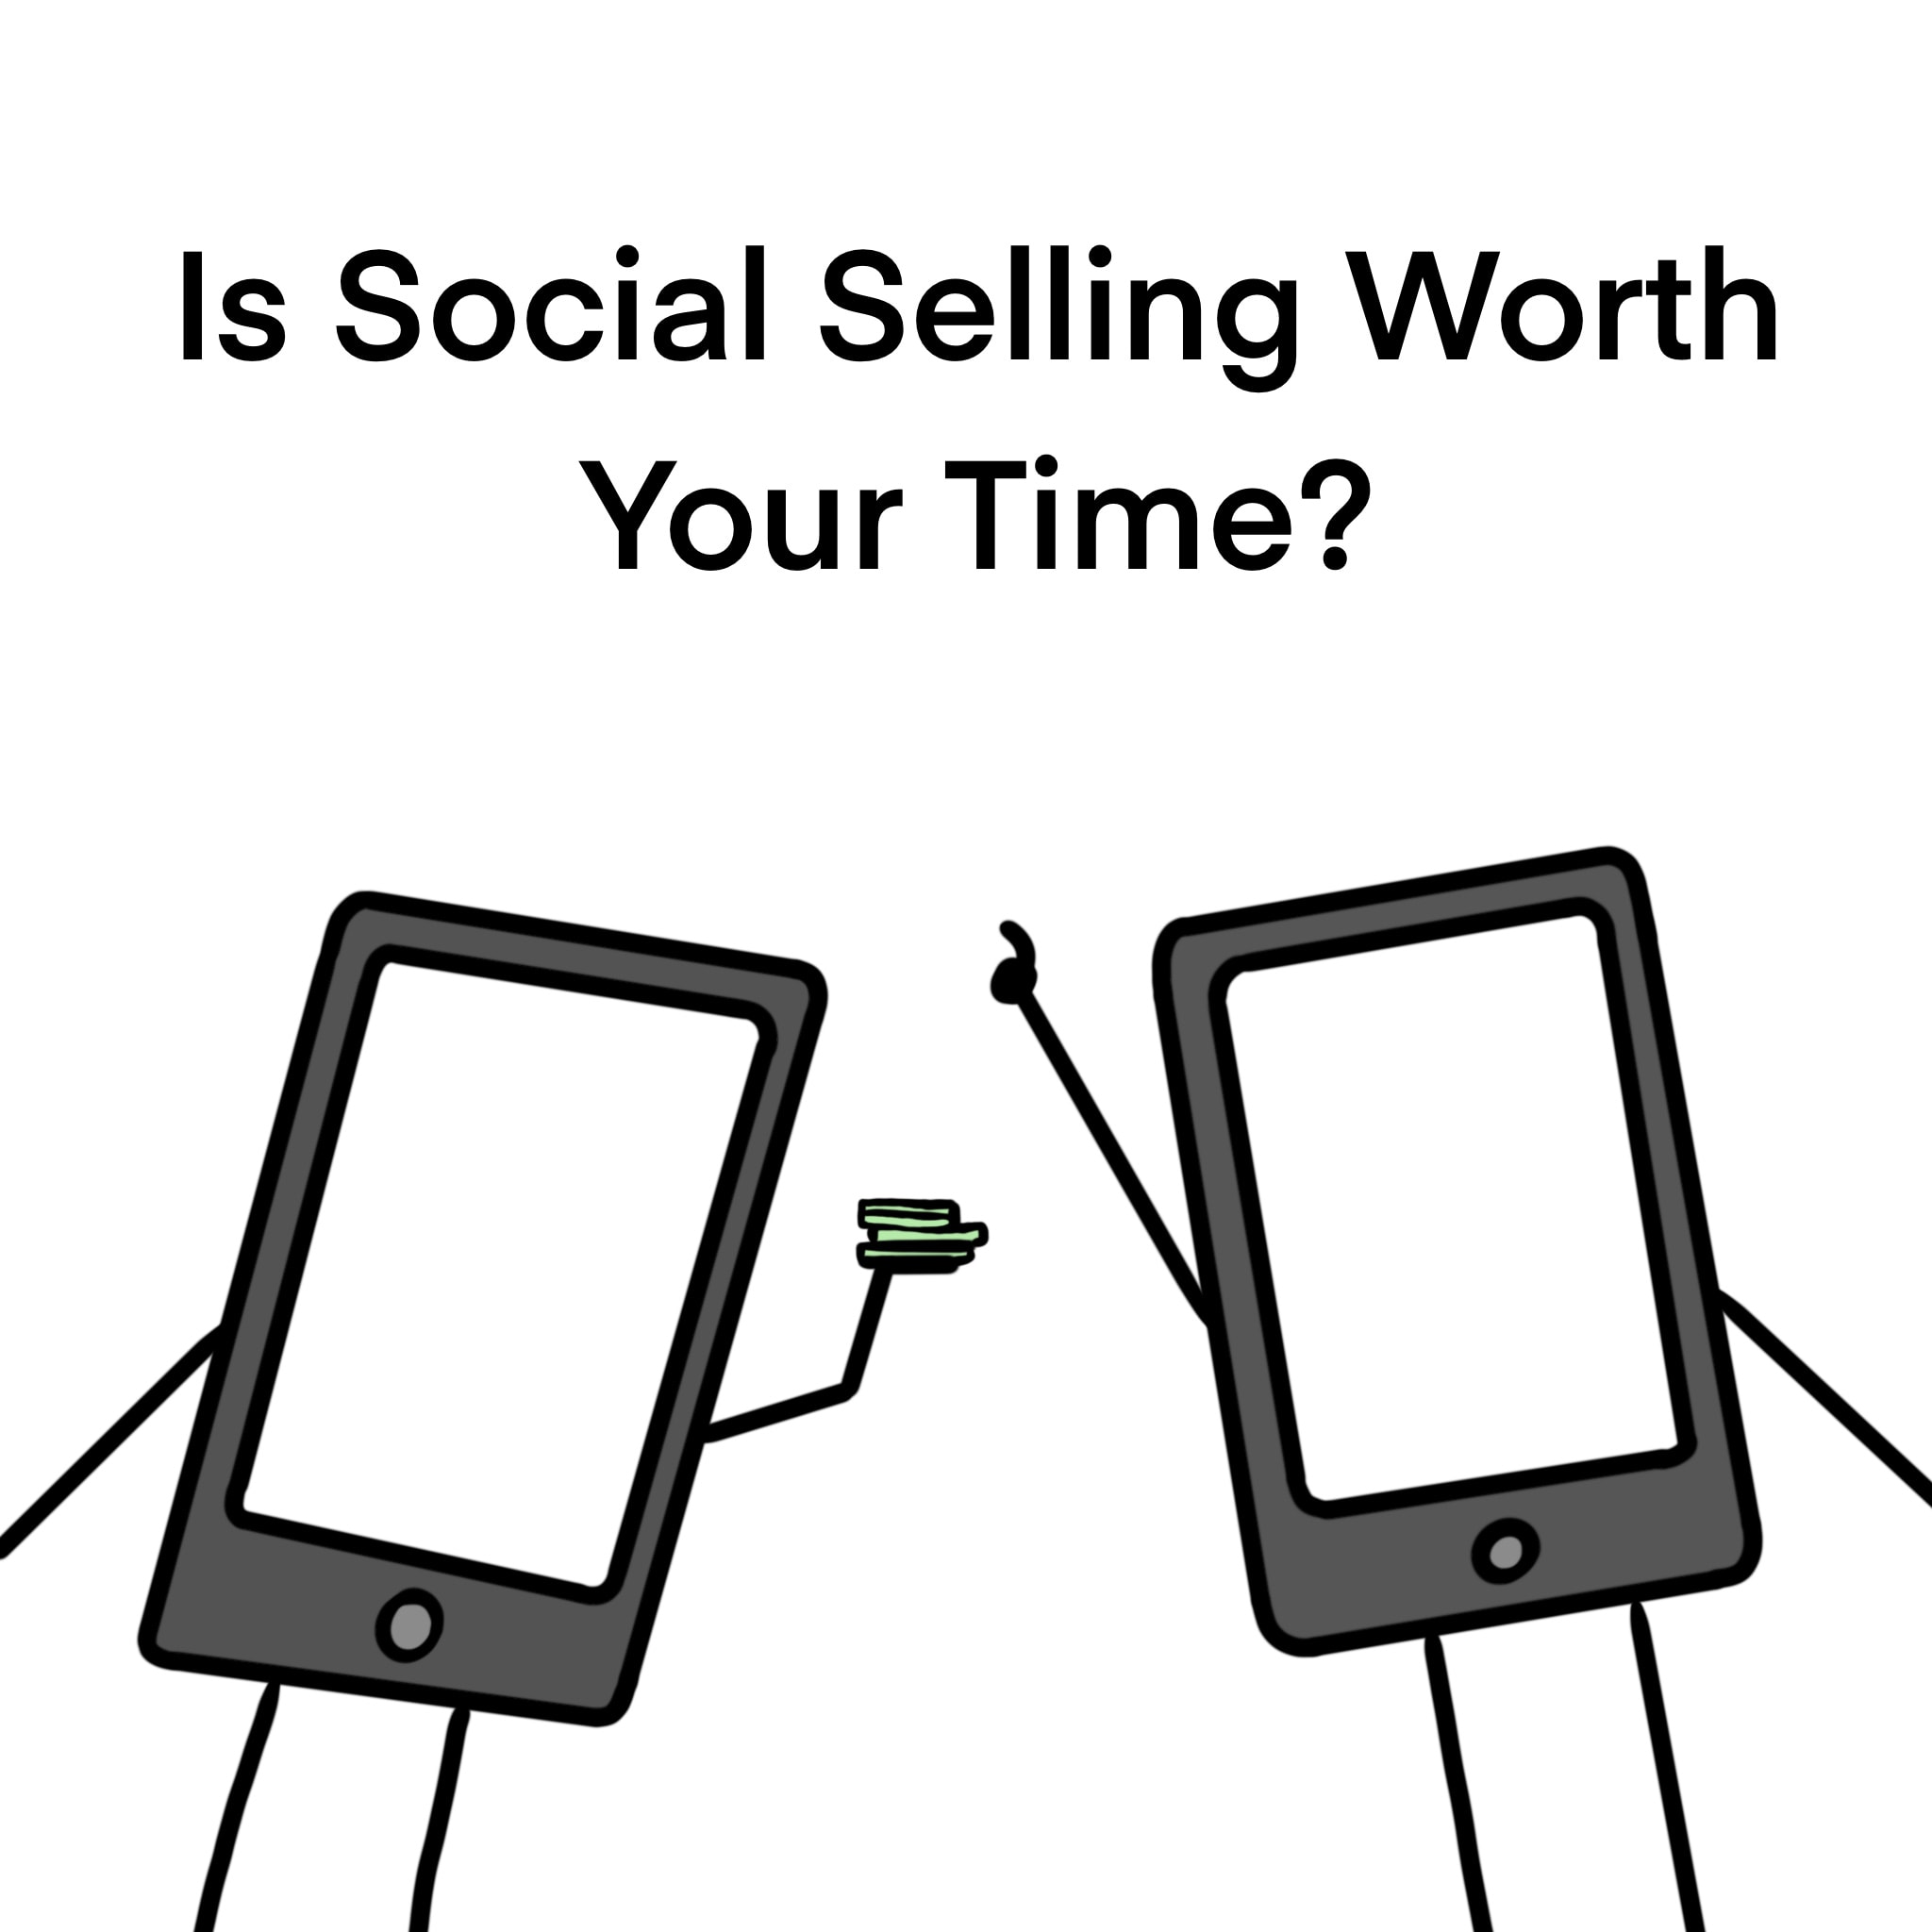 Phones Is Social Selling Worth Your Time 2 cellphone 2d animated characters chitchatting